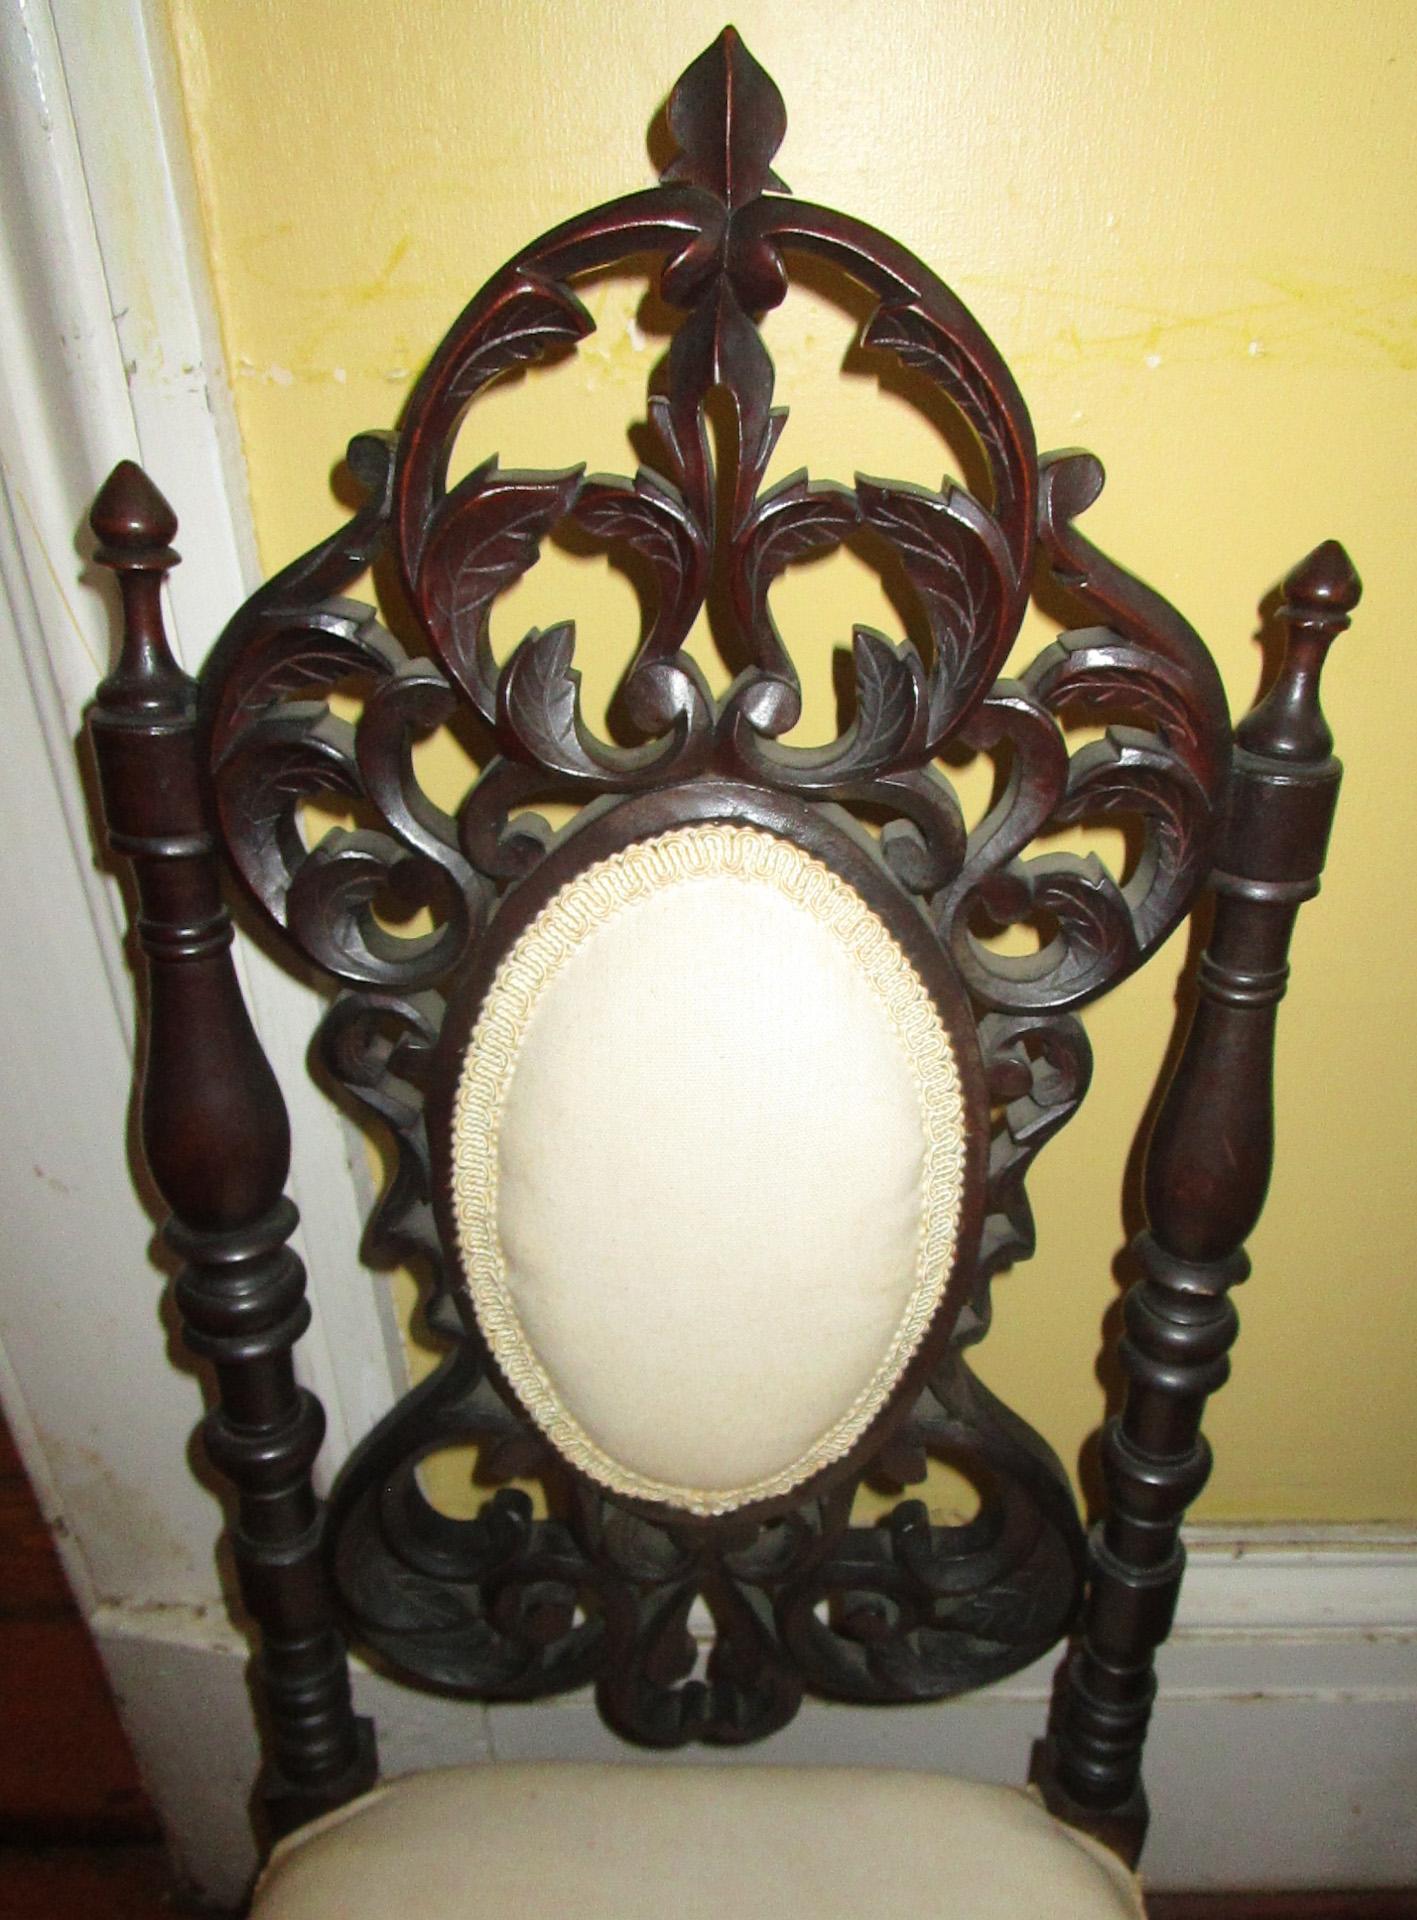 19th c. American Mahogany Rococo Revival Child's Chair with Tracery Back For Sale 3